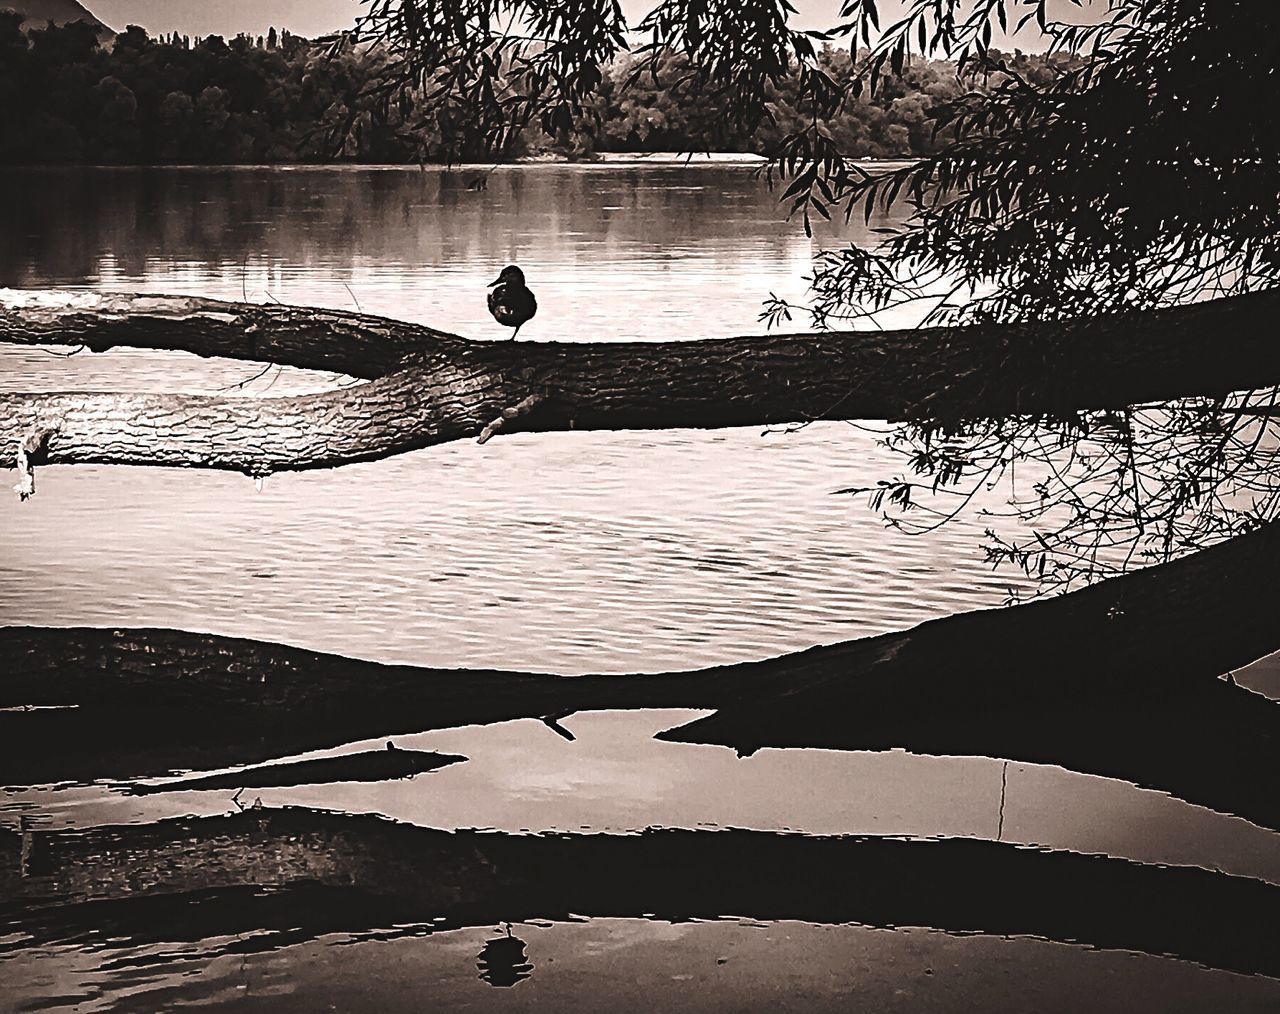 water, reflection, black and white, monochrome, lake, monochrome photography, nature, tree, silhouette, beauty in nature, tranquility, animal, animal themes, plant, scenics - nature, one person, wildlife, bird, outdoors, tranquil scene, day, sky, animal wildlife, black, morning, darkness, men, leisure activity, non-urban scene